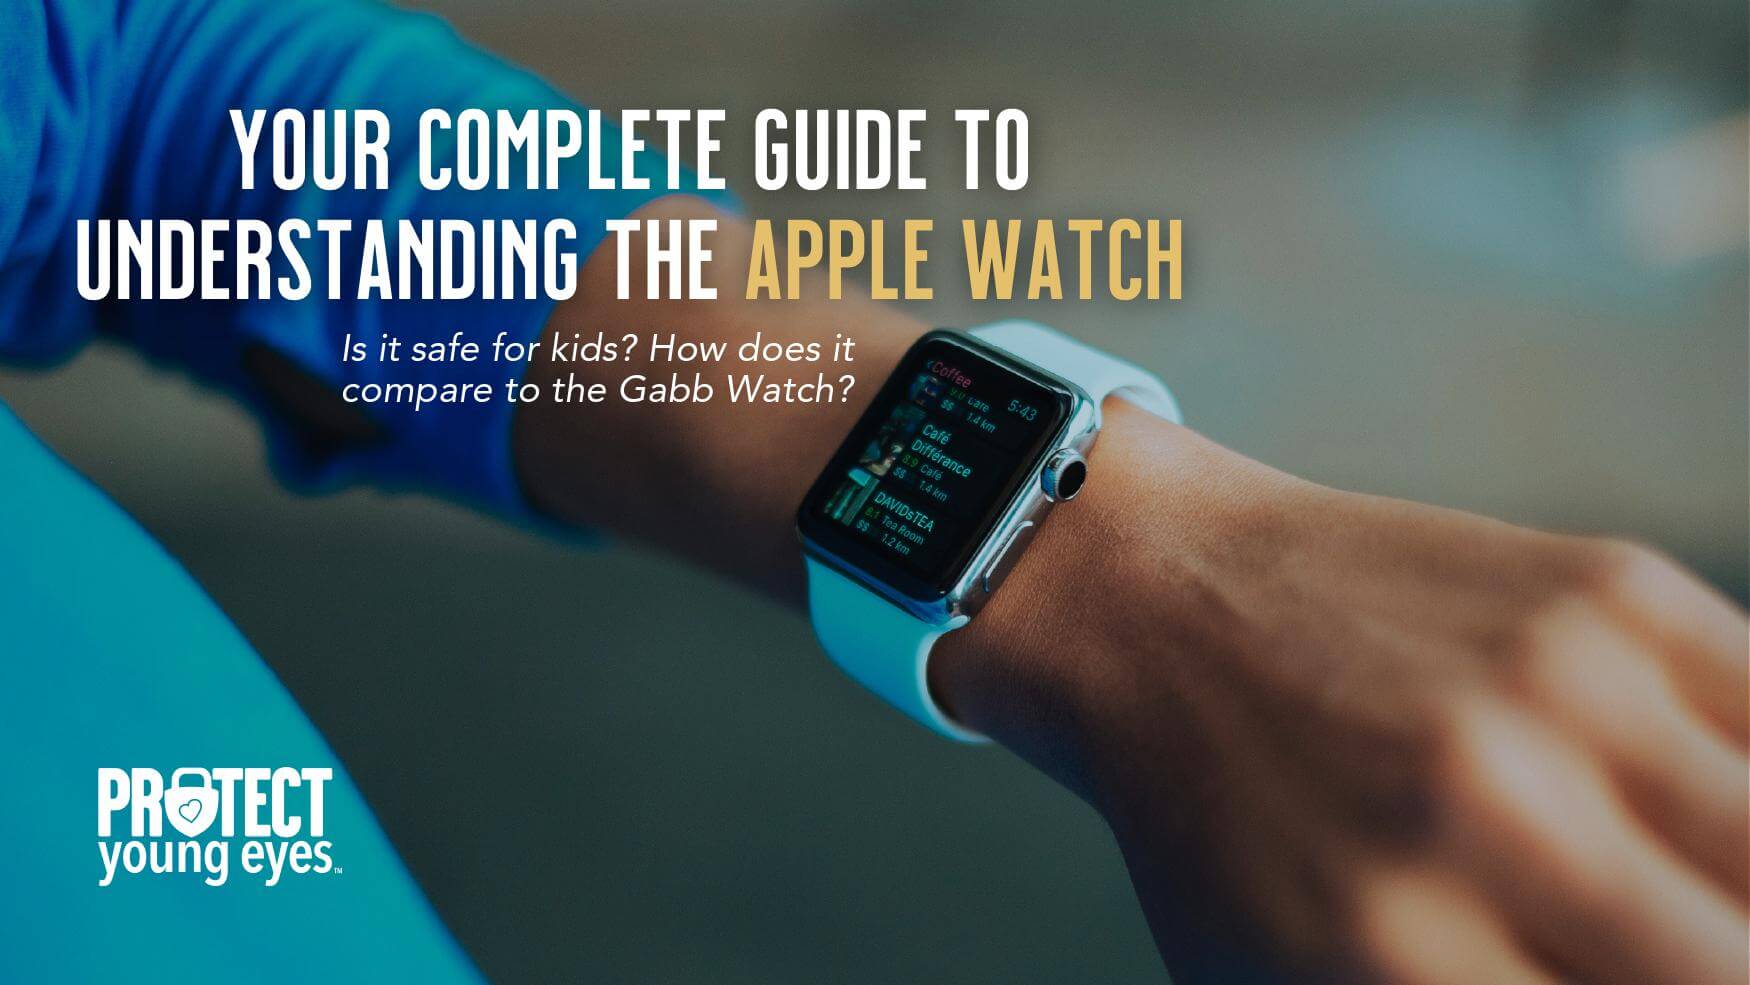 How to use Apple Health: Essential tips for your app - Wareable